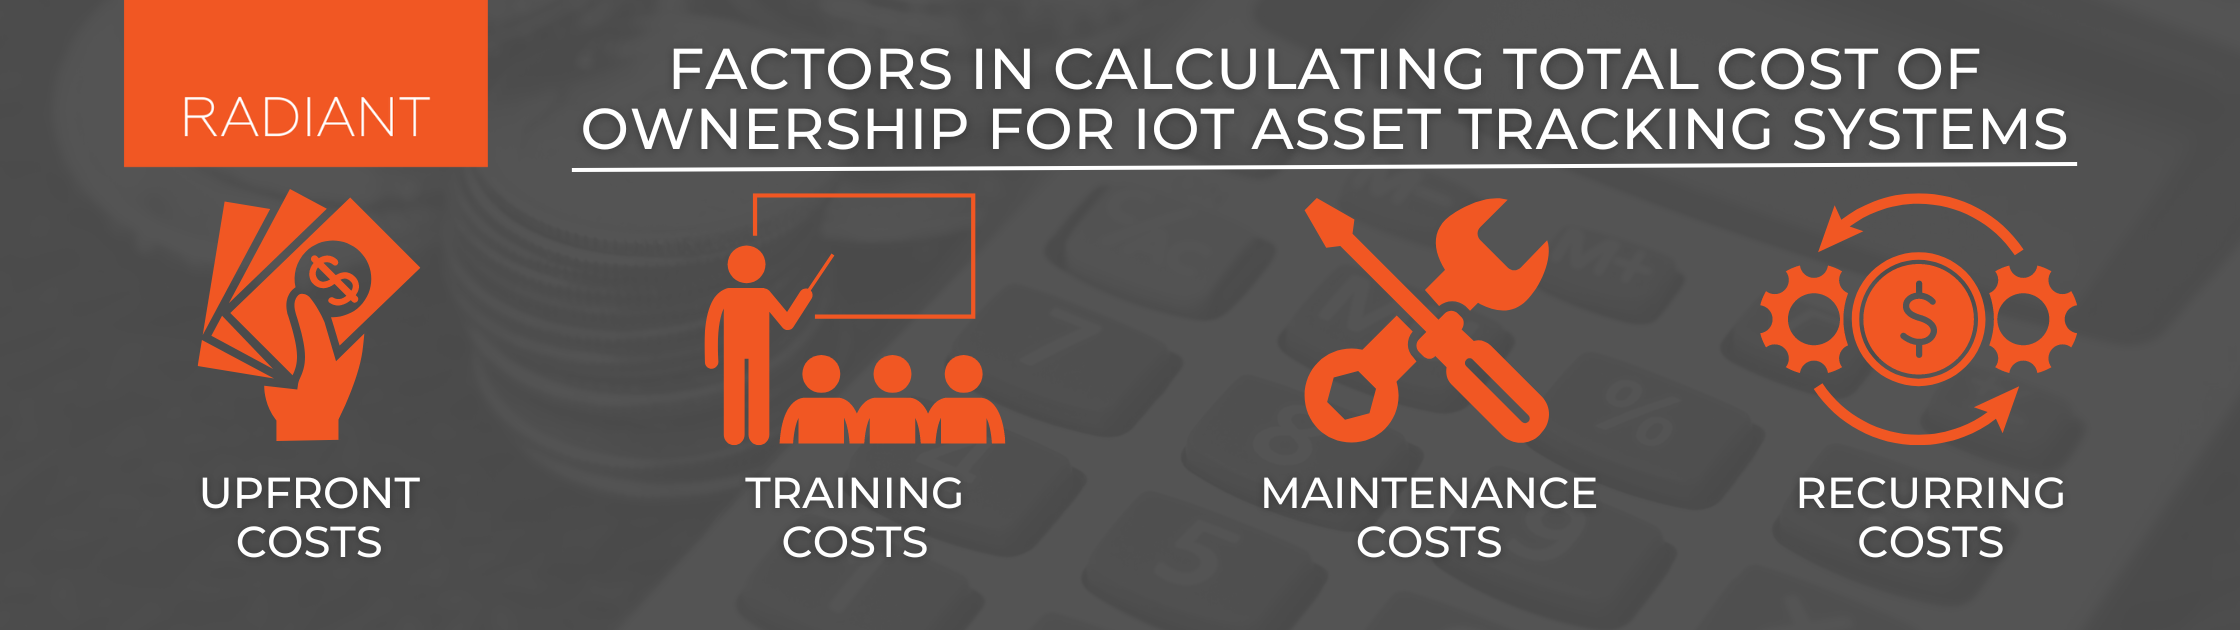 IoT Enabled Asset Tracking - IoT Enabled Asset Management - Internet Of Things IoT Asset Tracking - Calculating Assets - Asset Tracking ROI Calculator - Calculating Return On Investment - IoT Asset Tracking System - Calculating Return On Investment For IoT Asset Tracking System - IoT Asset Tracking Systems - IoT Asset Tracking Solutions - IoT Asset Management - Automated Asset Management